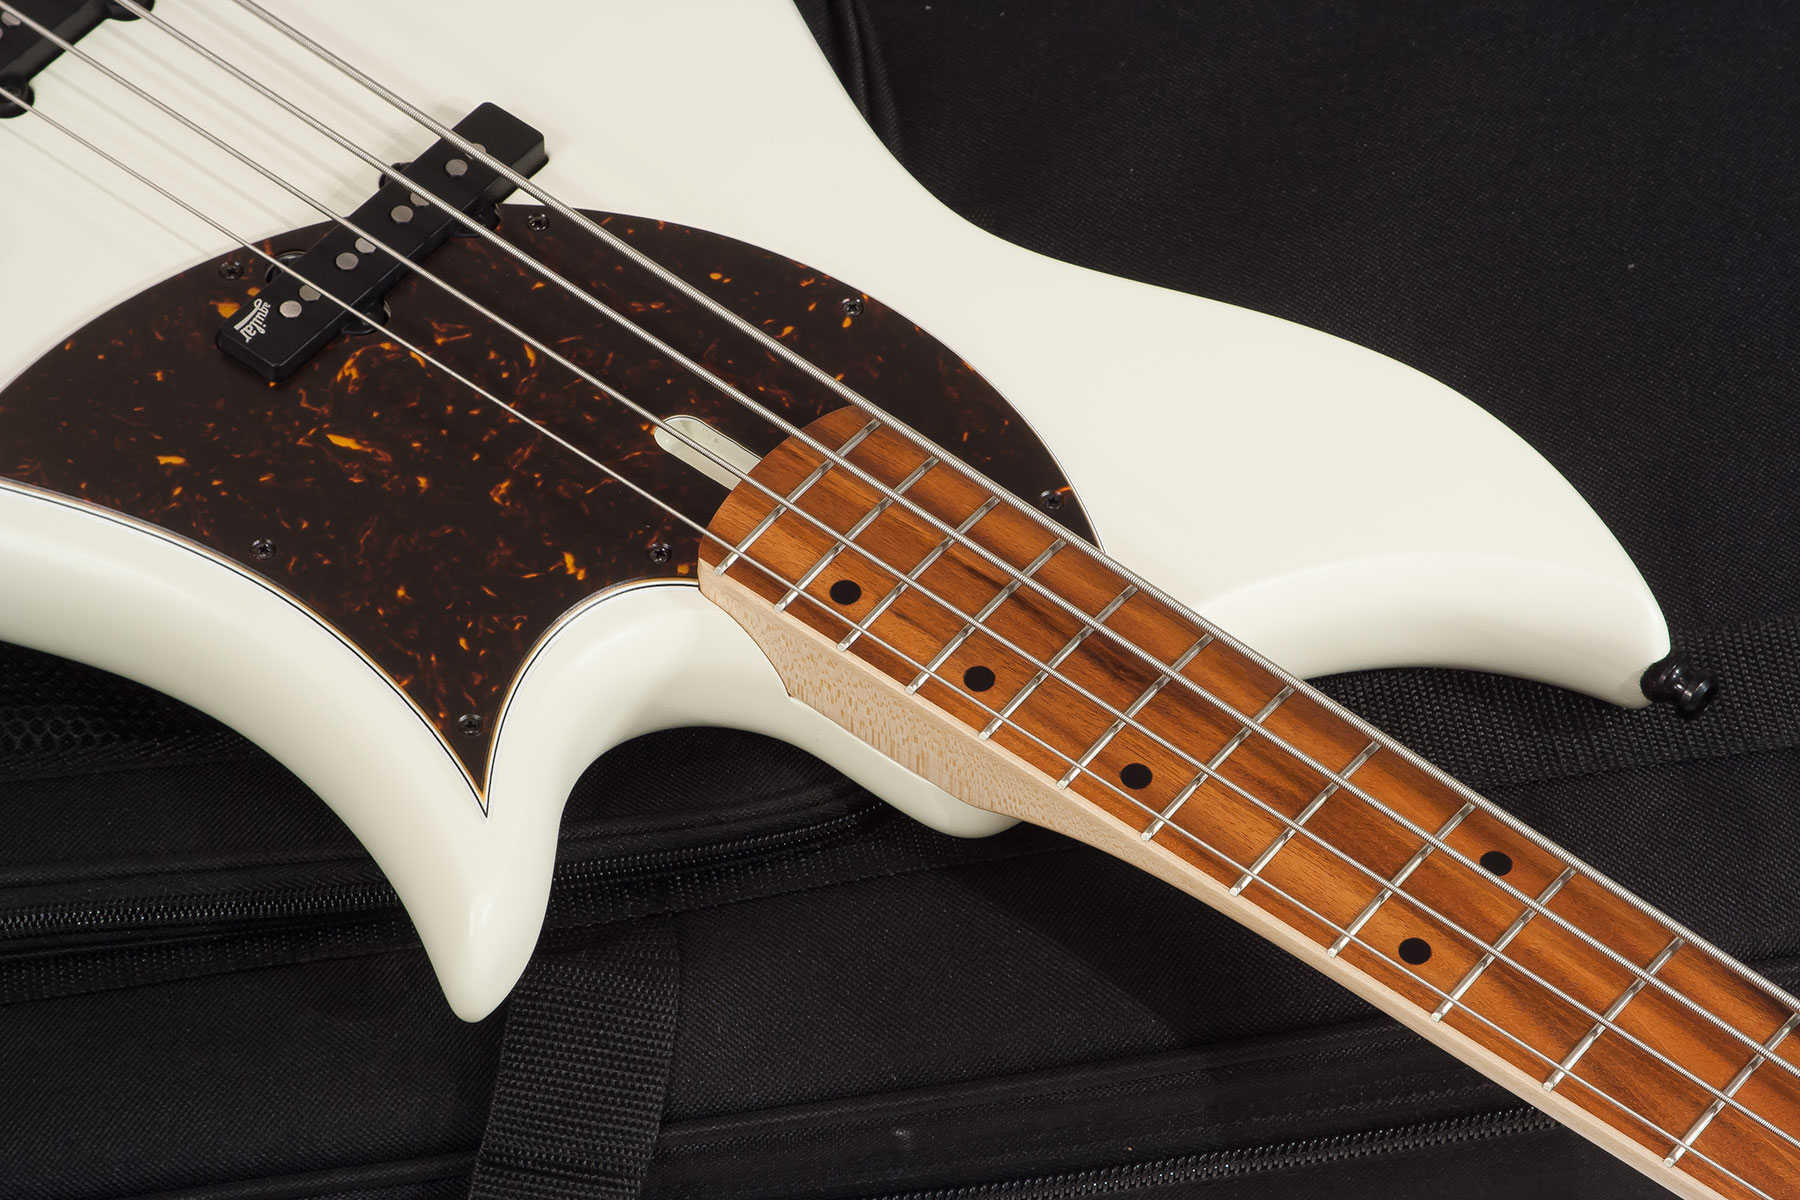 Aquilina Sirius 4 Standard Rw - White - Basse Électrique Solid Body - Variation 2